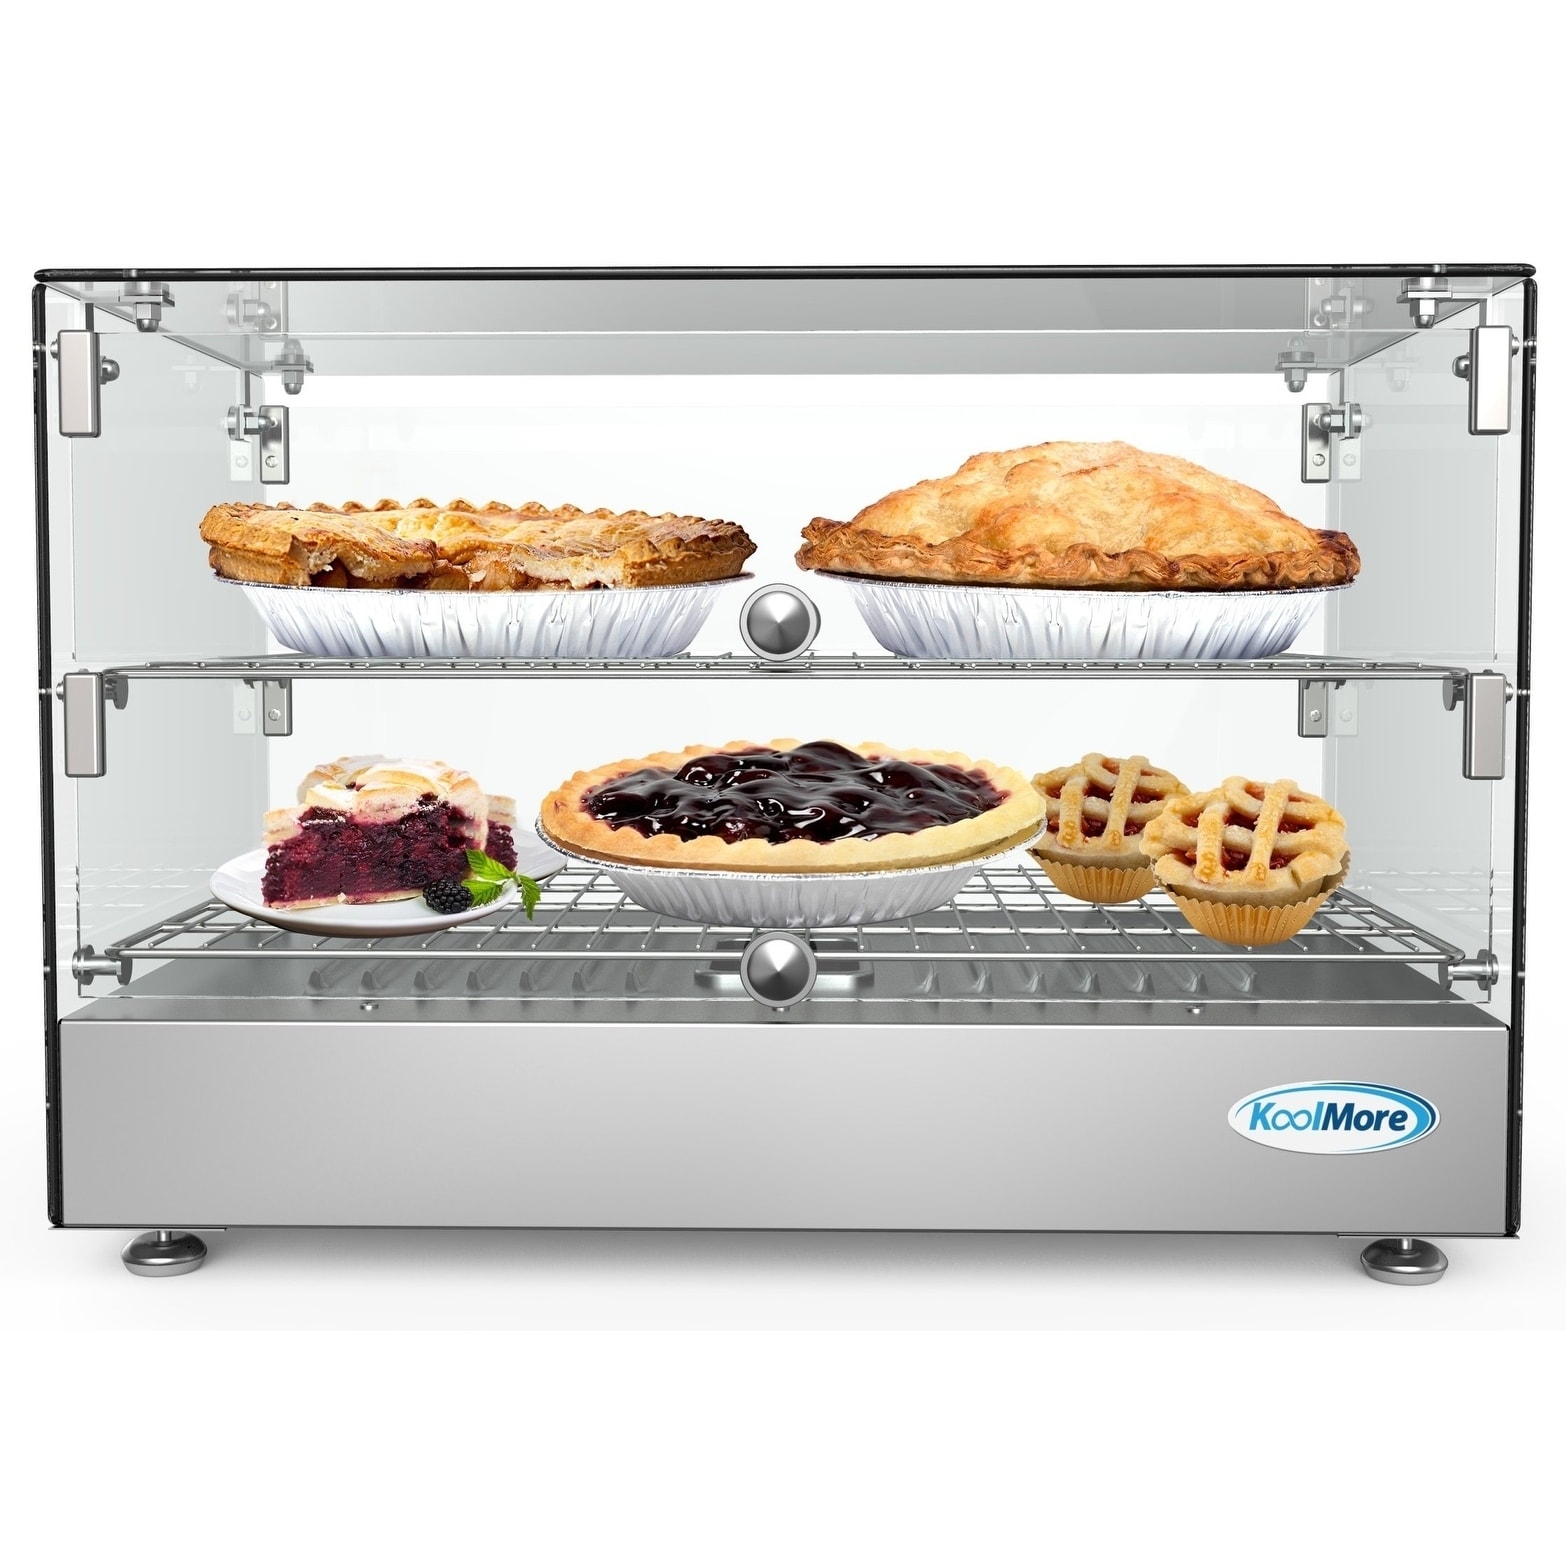 https://ak1.ostkcdn.com/images/products/27776742/22-Inch-Self-Service-Commercial-Countertop-Food-Warmer-Display-Case-1.7-cu.ft.-N-A-5883eebd-8dff-4bc5-b0ca-1af8e9f06c0e.jpg